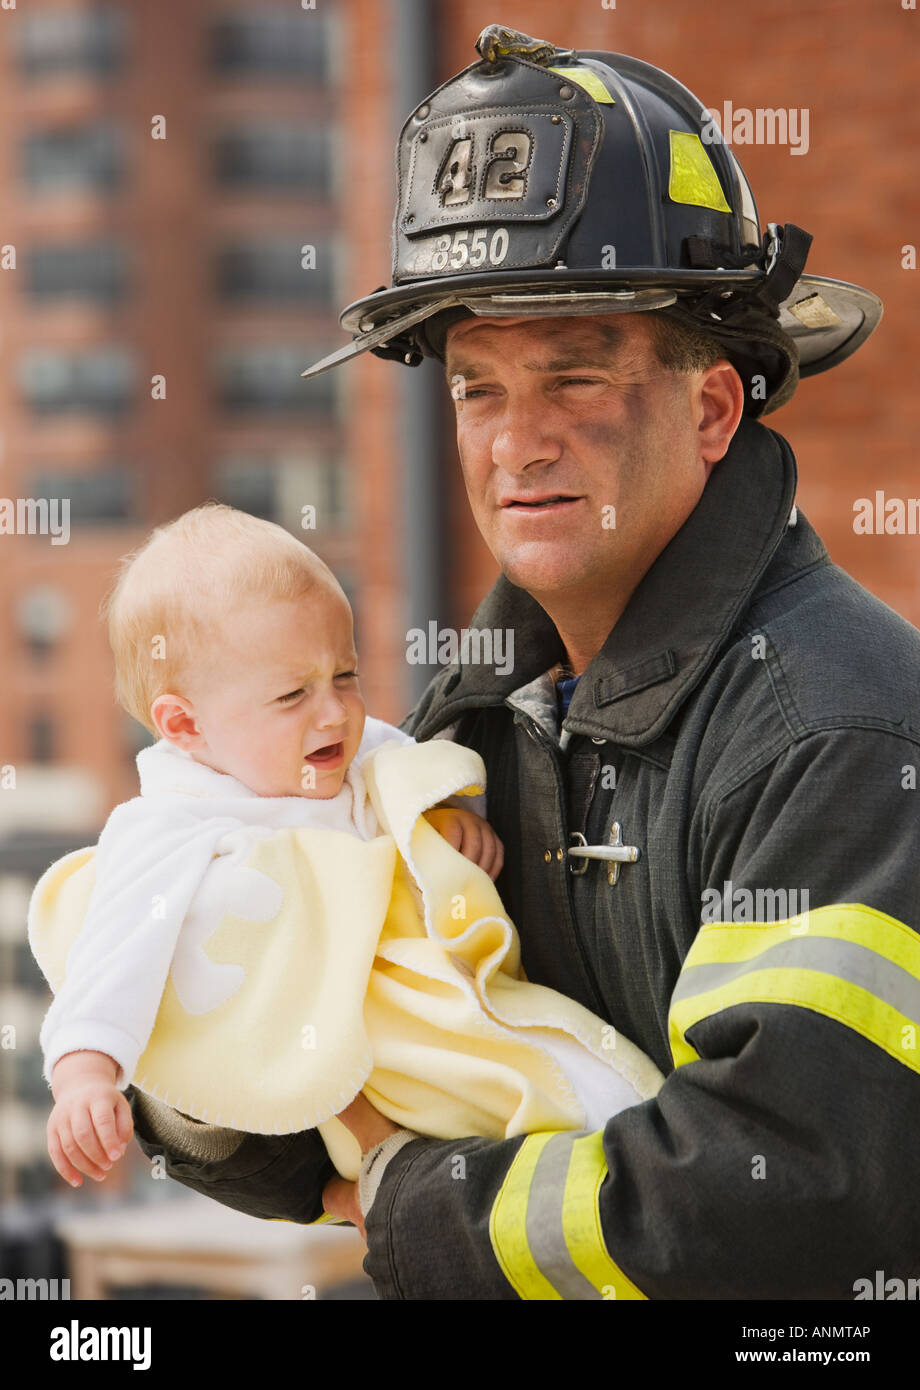 Male firefighter carrying baby Stock Photo